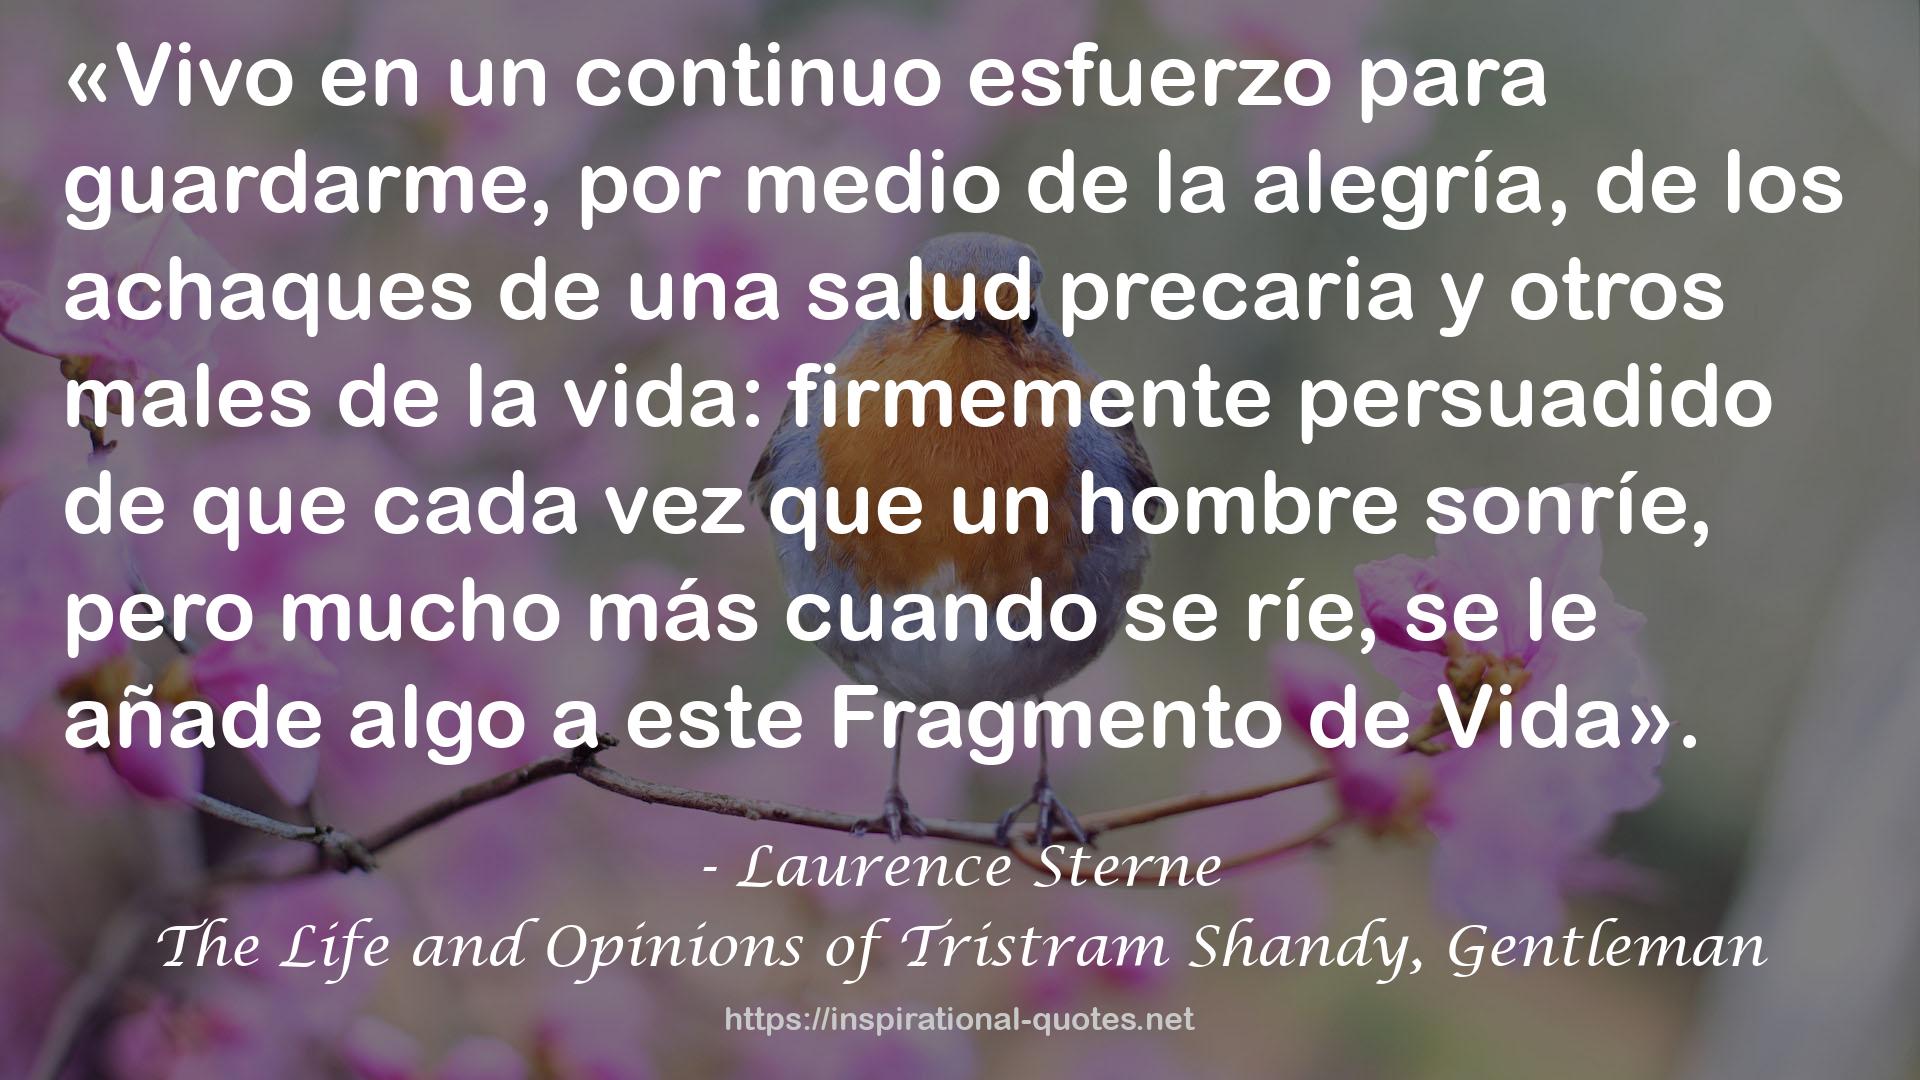 Laurence Sterne QUOTES